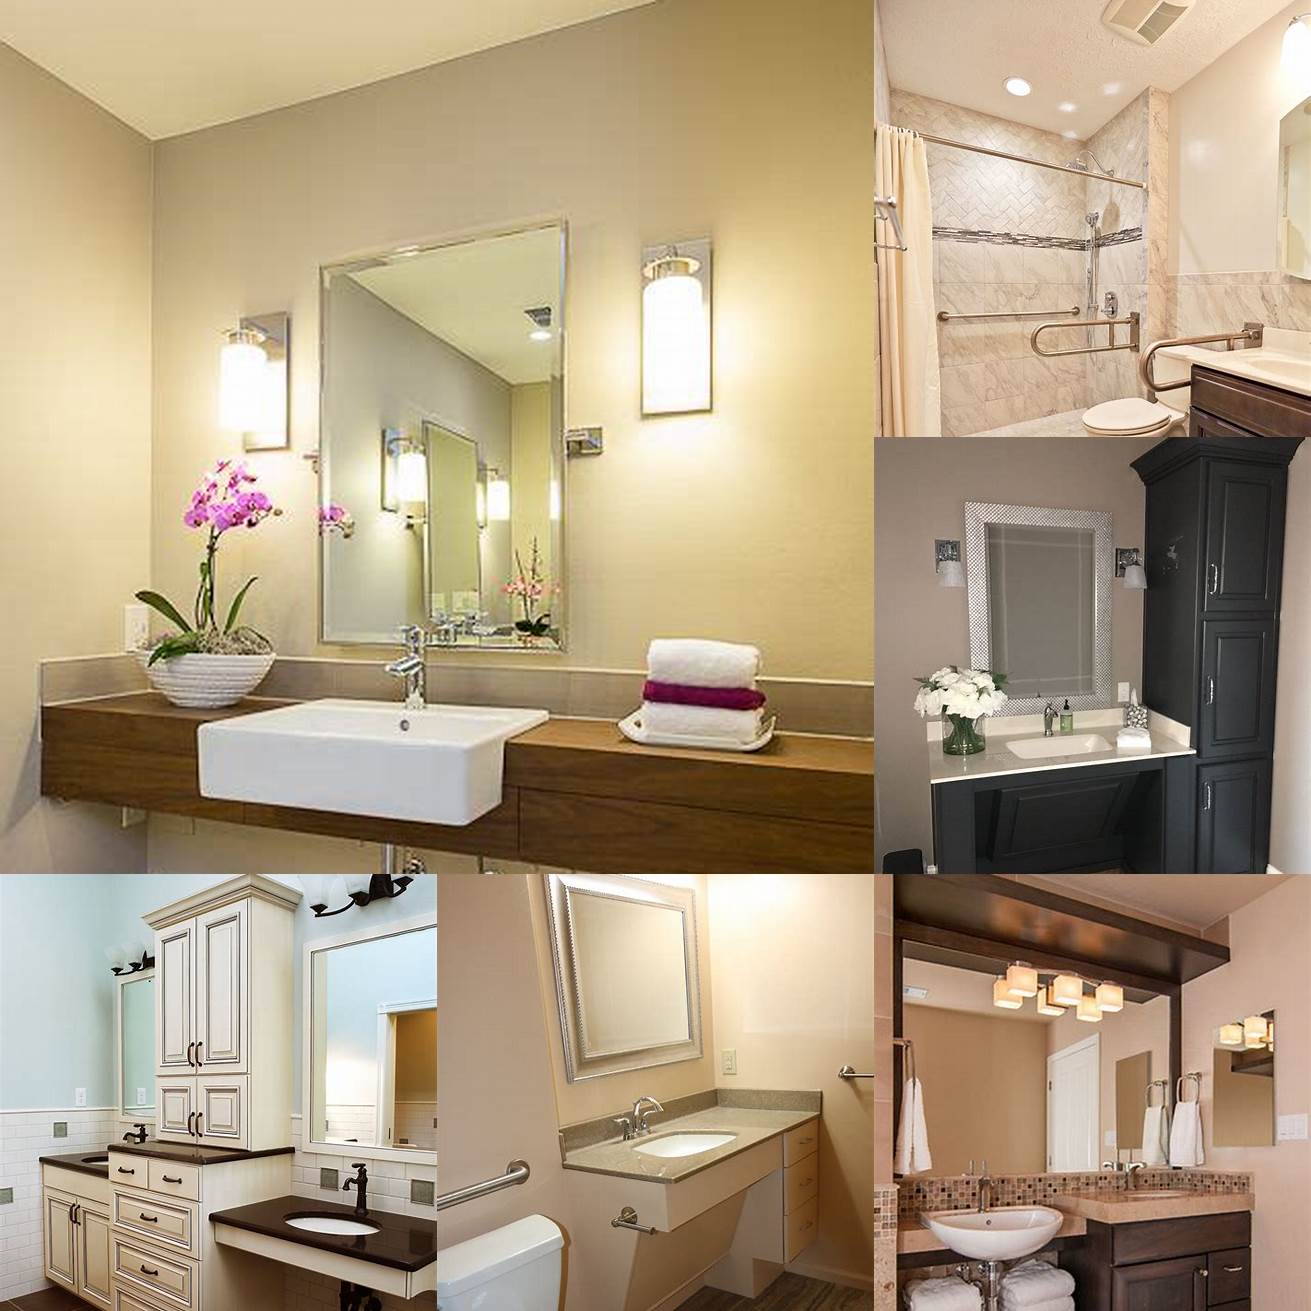 A handicap bathroom vanity with simple and modern design